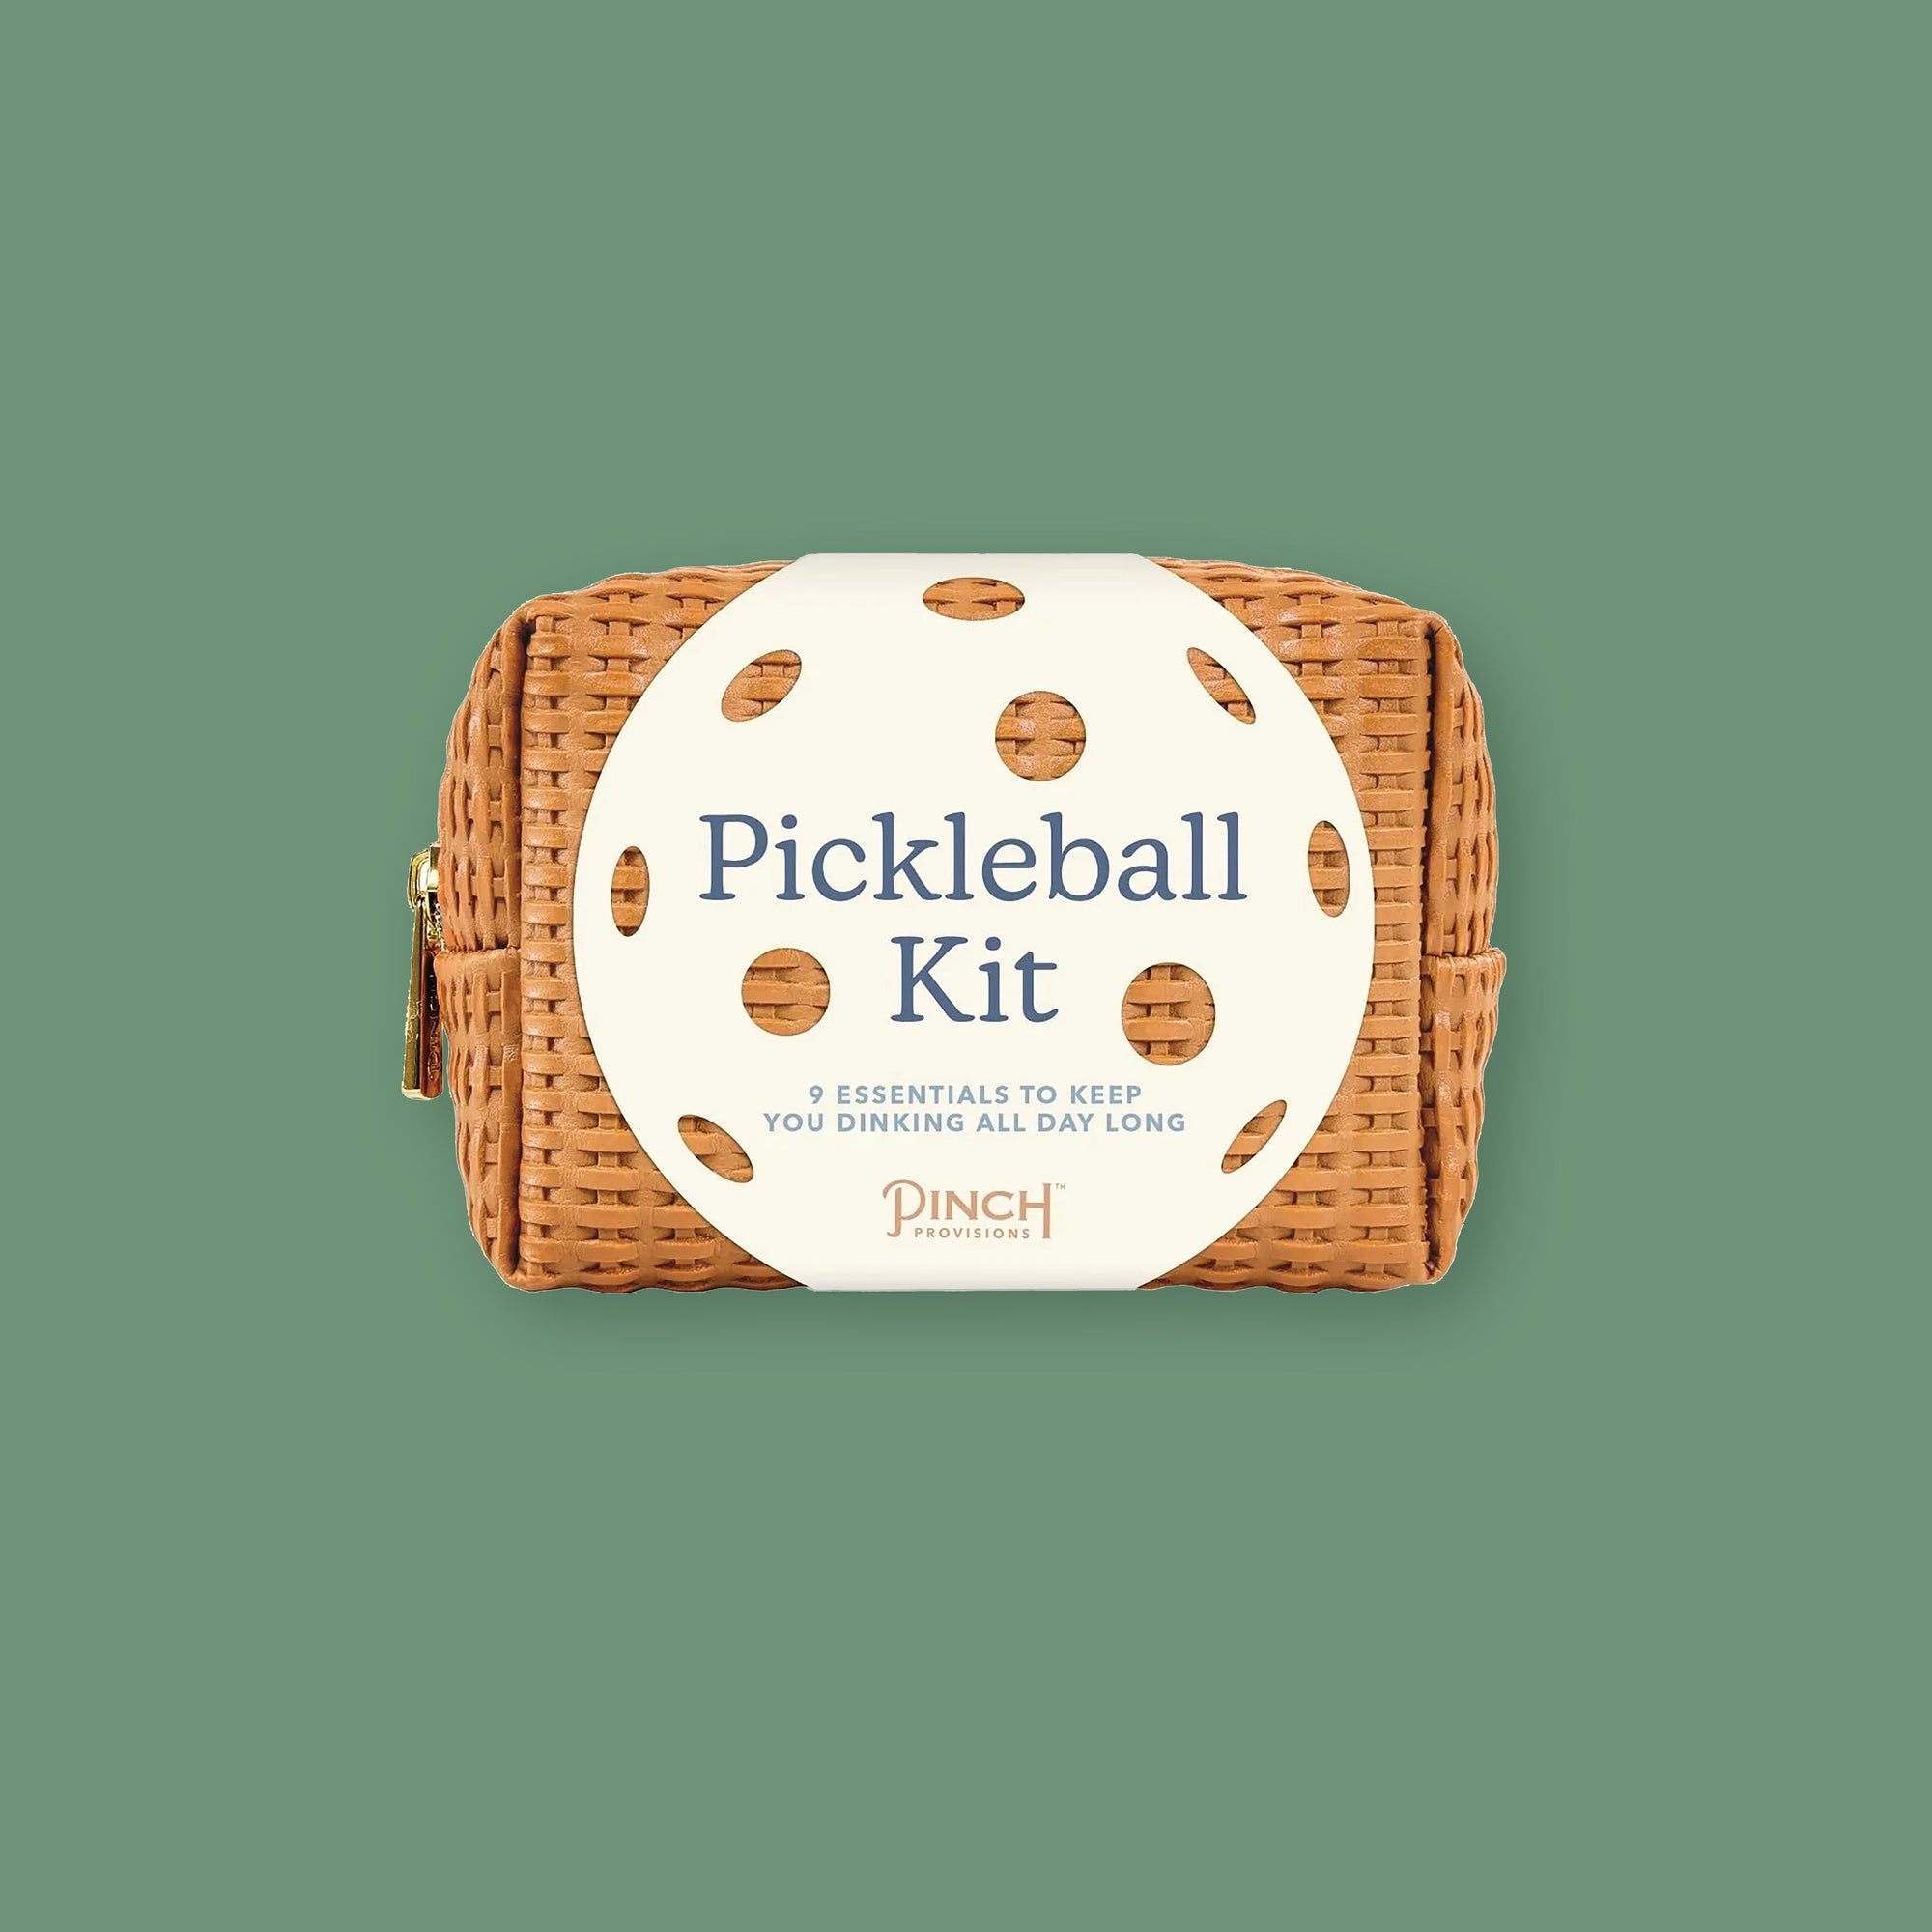 On a moss green background sits a kit. This light brown woven kit has a cream, round label with holes on it that looks like a ball. It says "Pickleball Kit" in a blue, serif font. Under that it says "9 ESSENTIALS TO KEEP YOU DINKING ALL DAY LONG" in light blue, all caps block font. It also says "PINCH PROVISIONS" in light brown, all caps font.